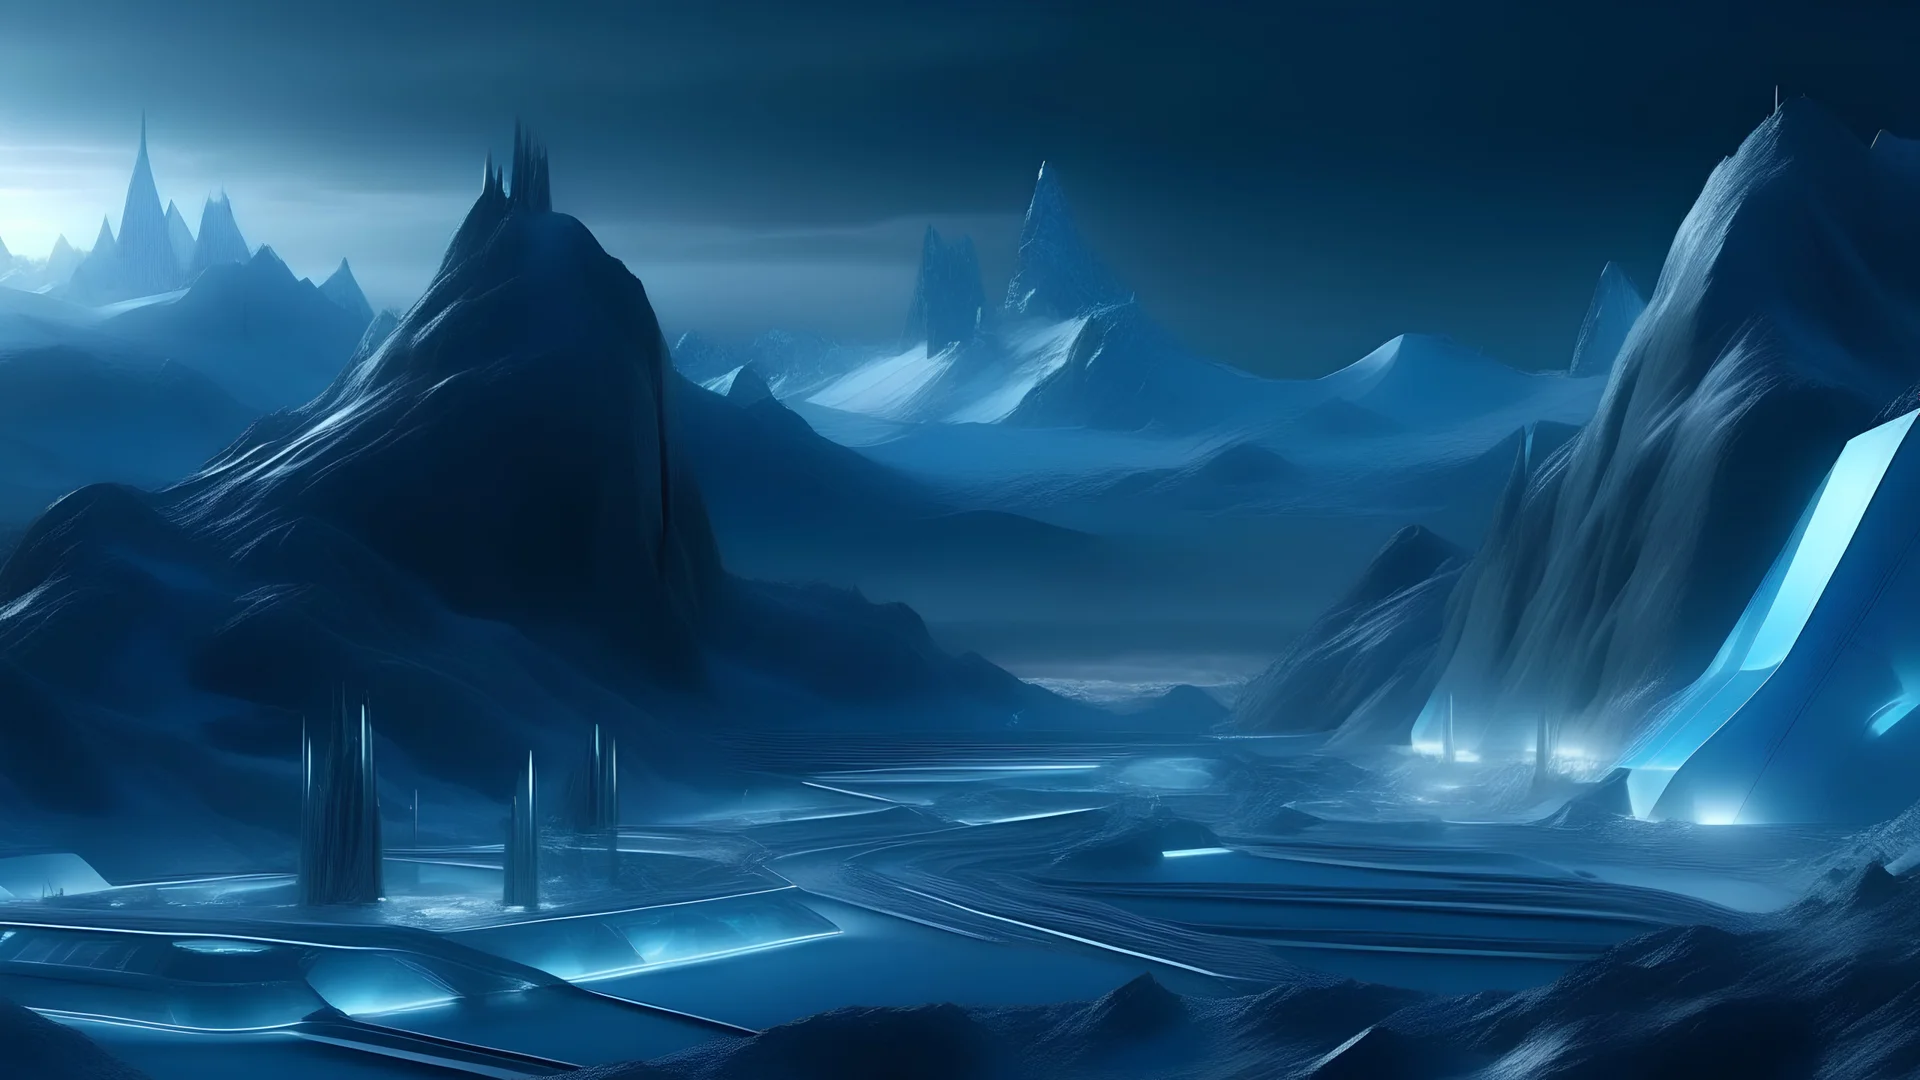 Futuristic city landscape with ice mountains behind night, close up